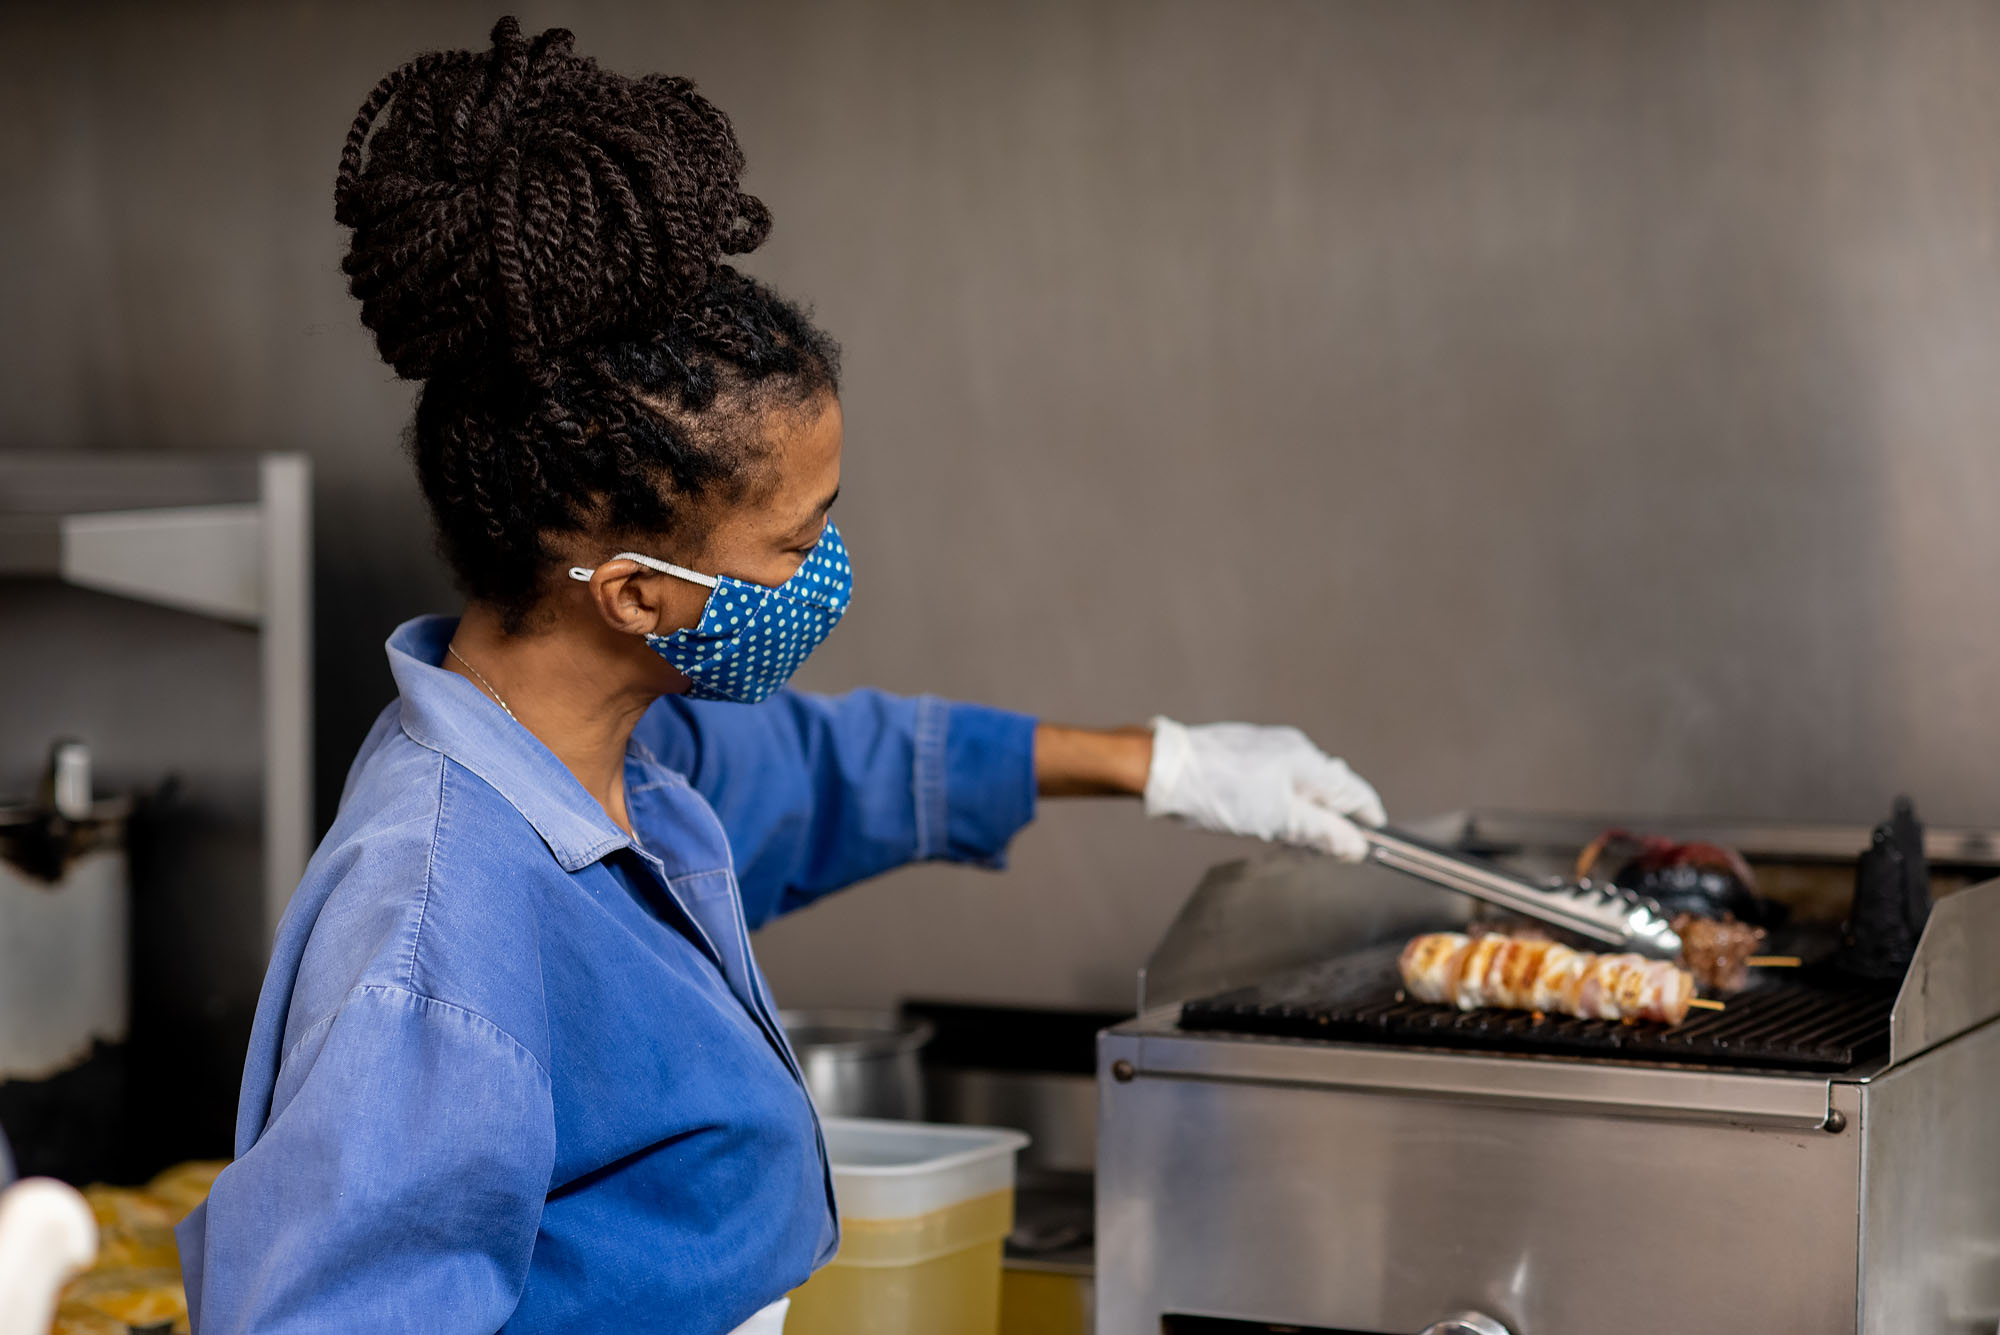 Natalia Pereira, chef and owner of Wood Spoon restaurant in Downtown LA, wearing a cloth mask and grilling meats in the kitchen.